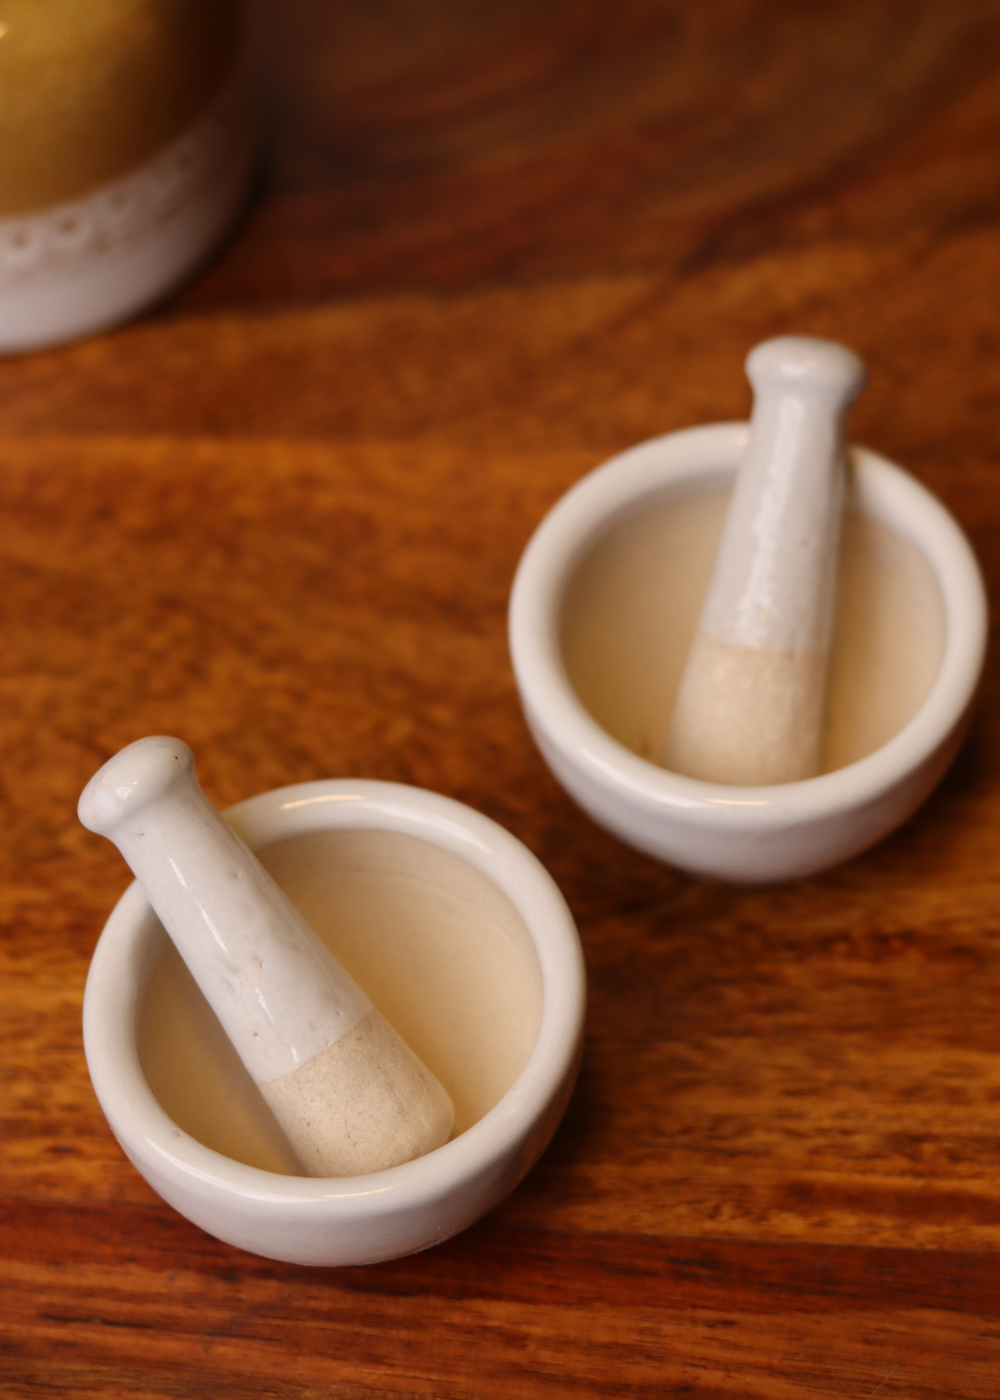 Lil Mortar and pestle